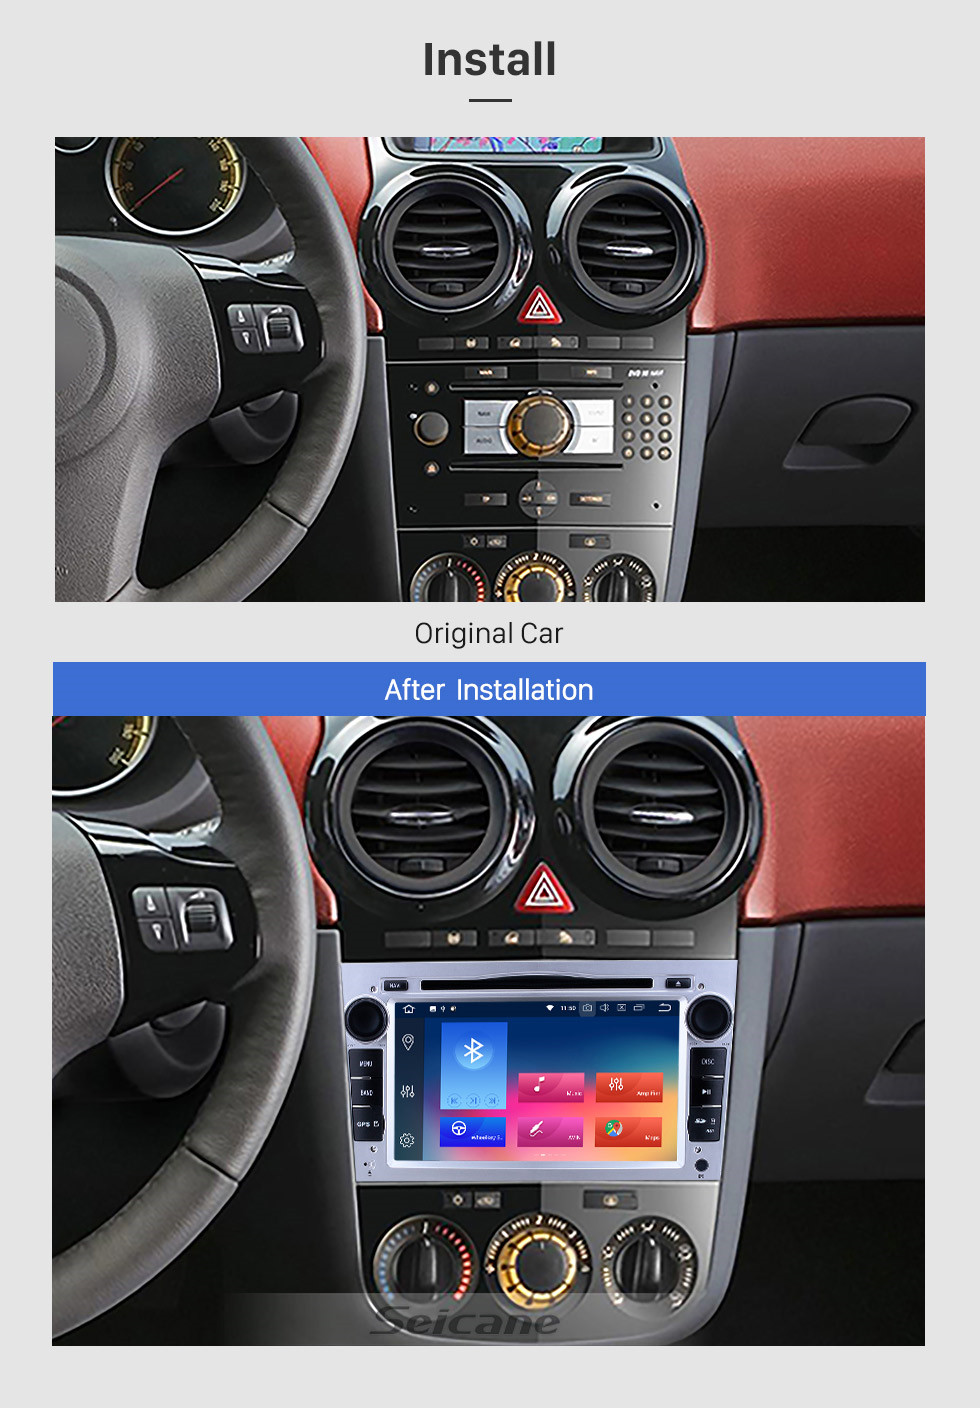 Seicane HD 1024*600 Touch Screen Android 9.0 2005-2011 Opel Zafira Multimedia GPS Radio Stereo Replacement with CD DVD Player Bluetooth OBD2 Backup Camera Mirror Link 3G WiFi HD 1080P Video